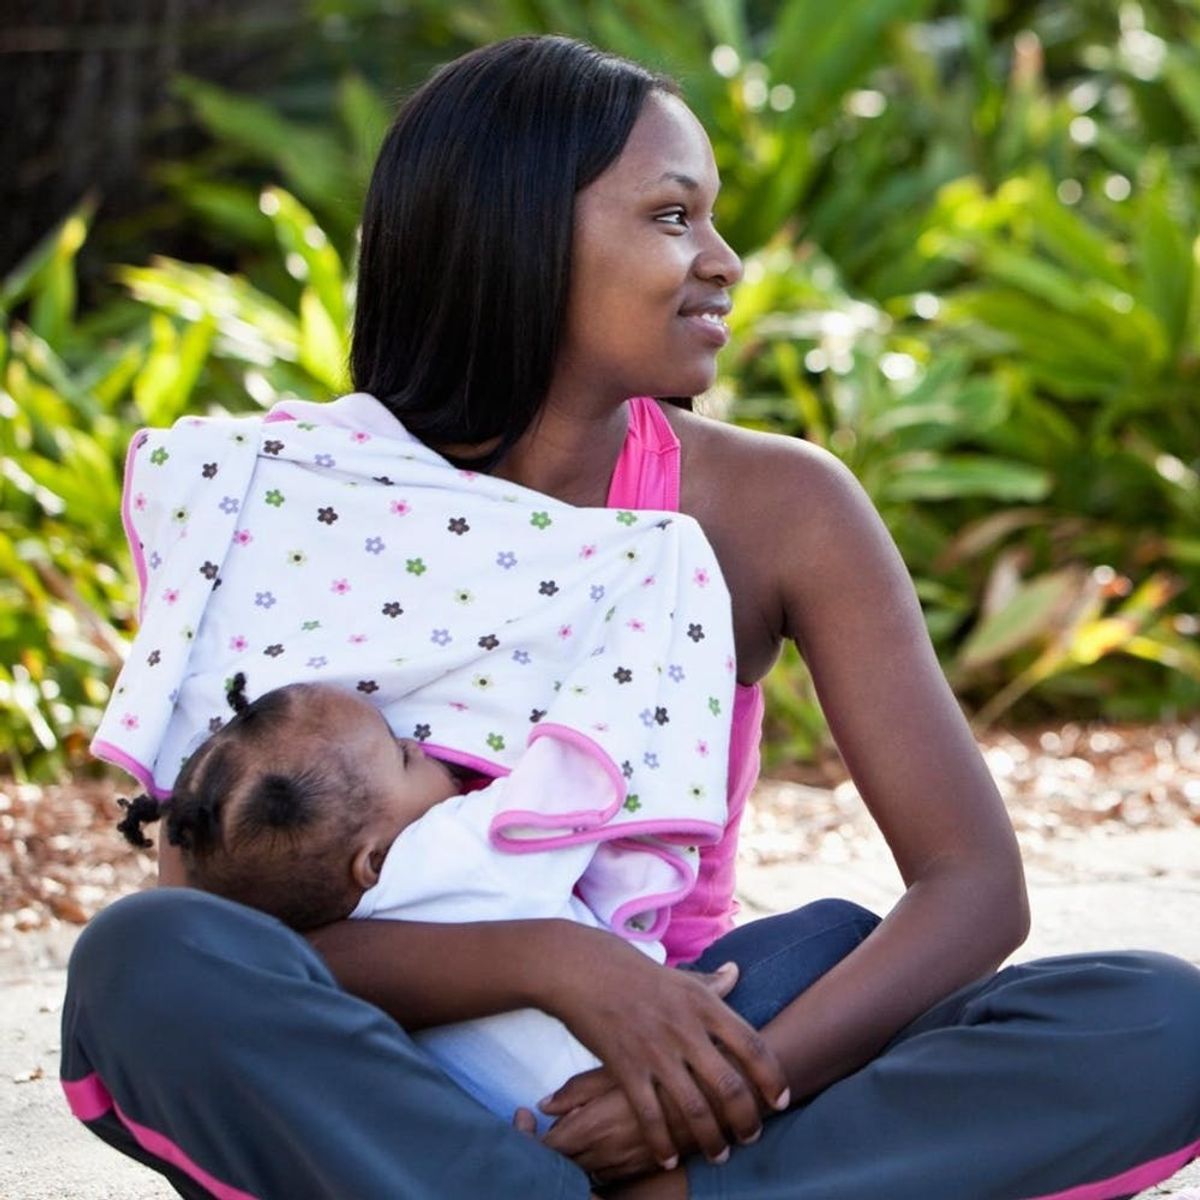 Breastfeeding Accessibility Isn’t Just About Babies — It’s a Women’s Health Issue